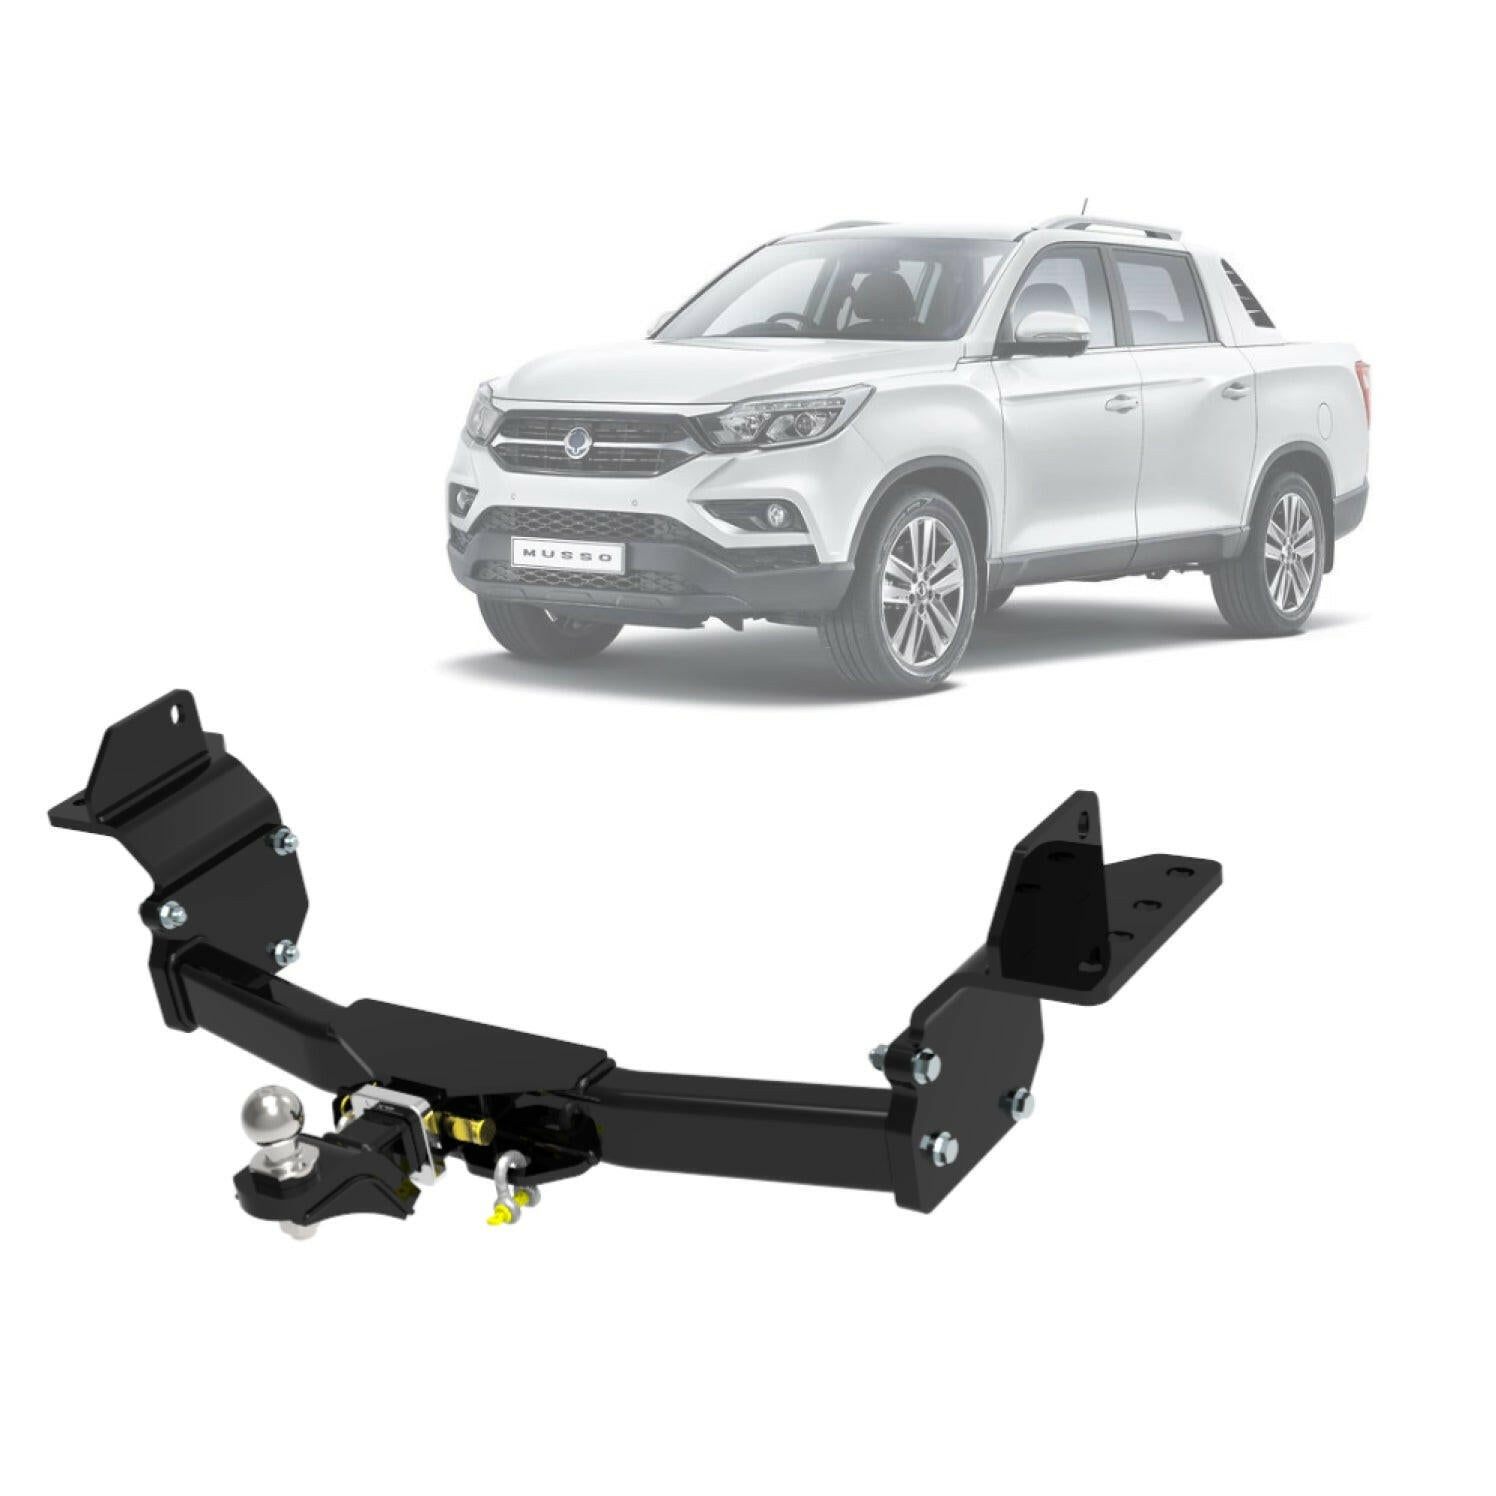 TrailBoss Heavy Duty 3500kg Tow Bar For SssangYong Musso (SWB Only).